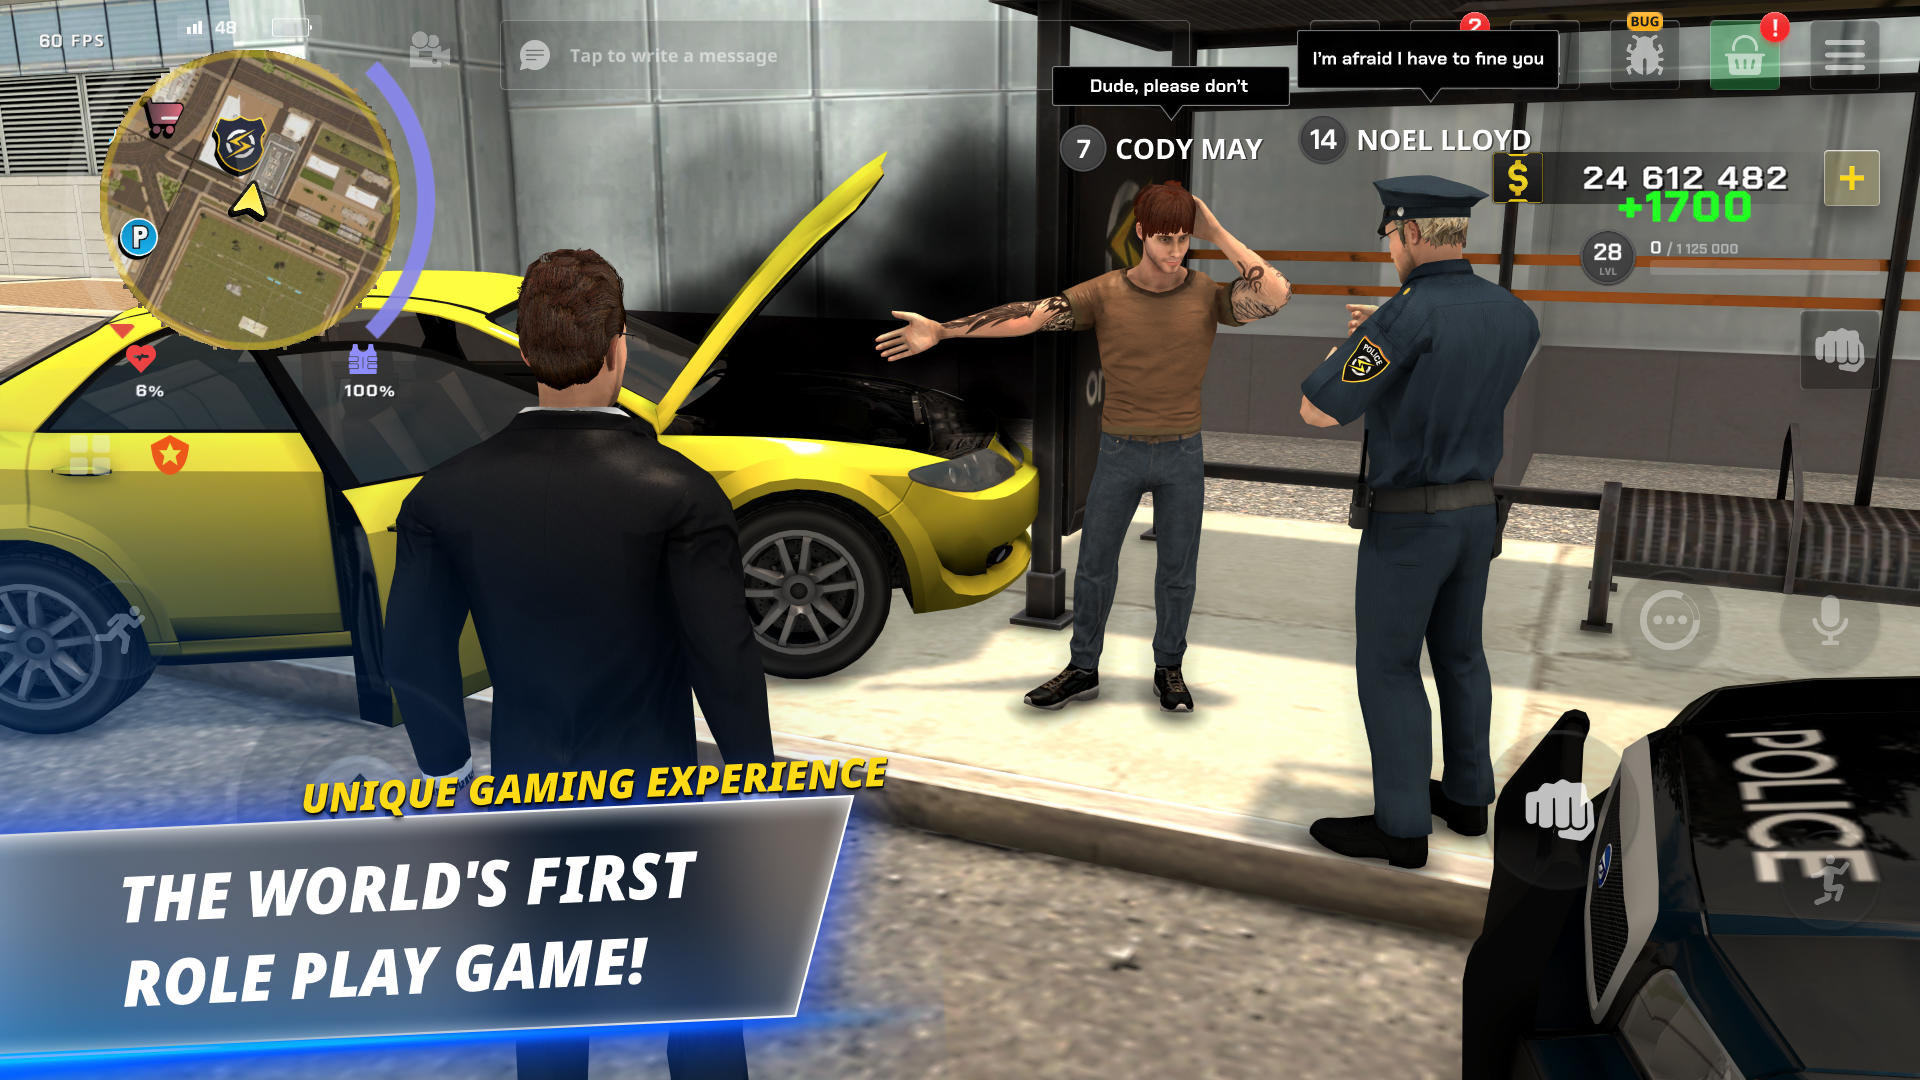 GTA RP MOBILE PARA ANDROID 2023 - Brasil Roleplay 